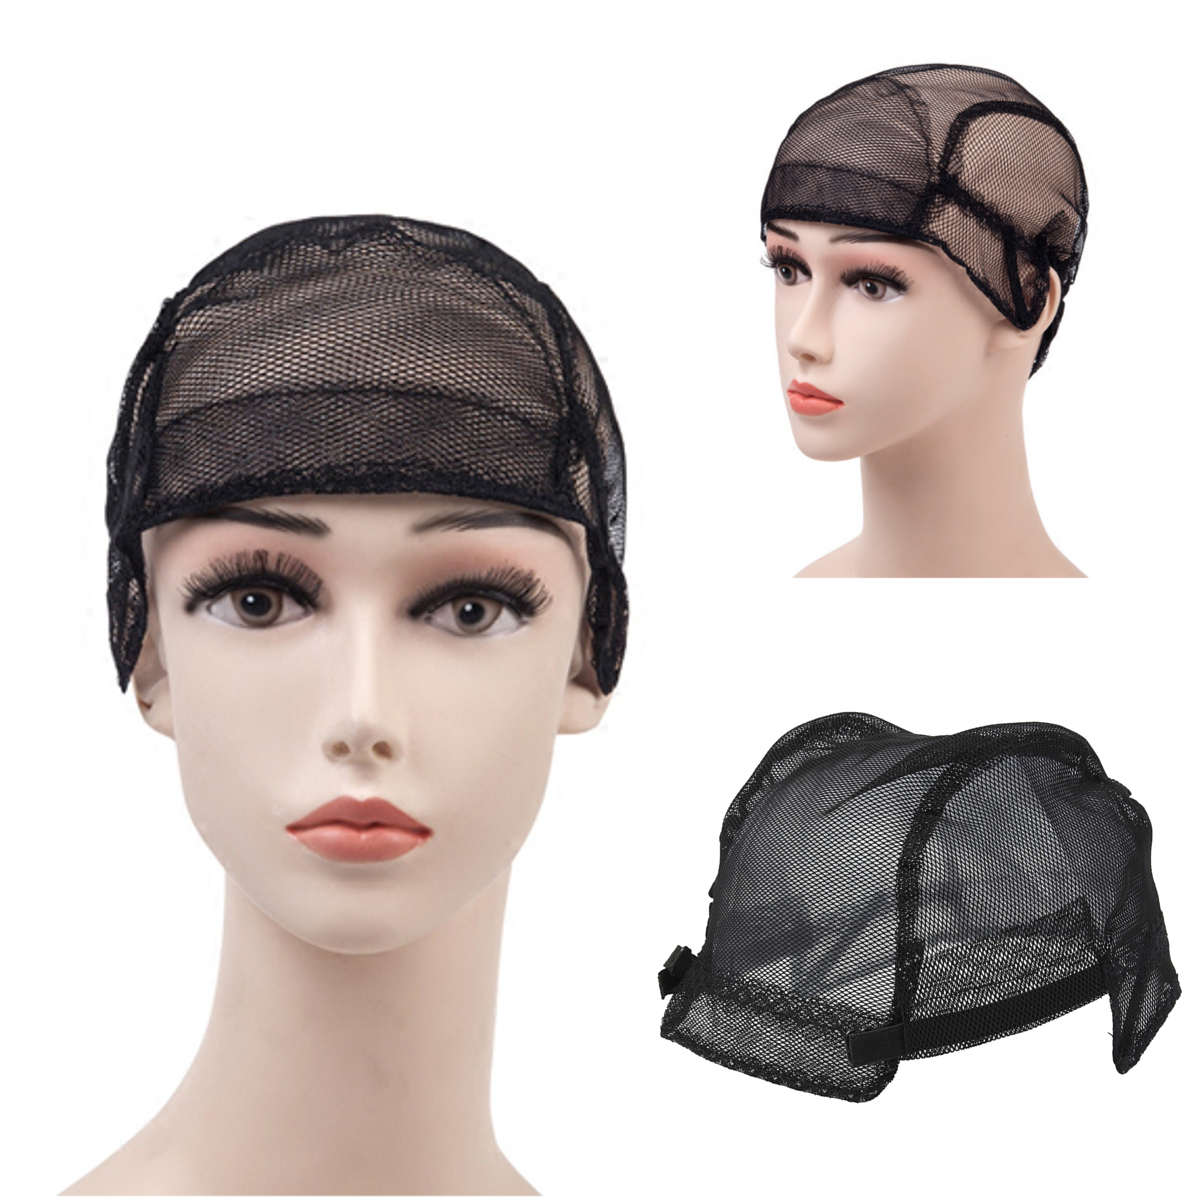 Wig Caps For Making Wigs Stretch Lace Weaving Cap Adjustable Straps Black